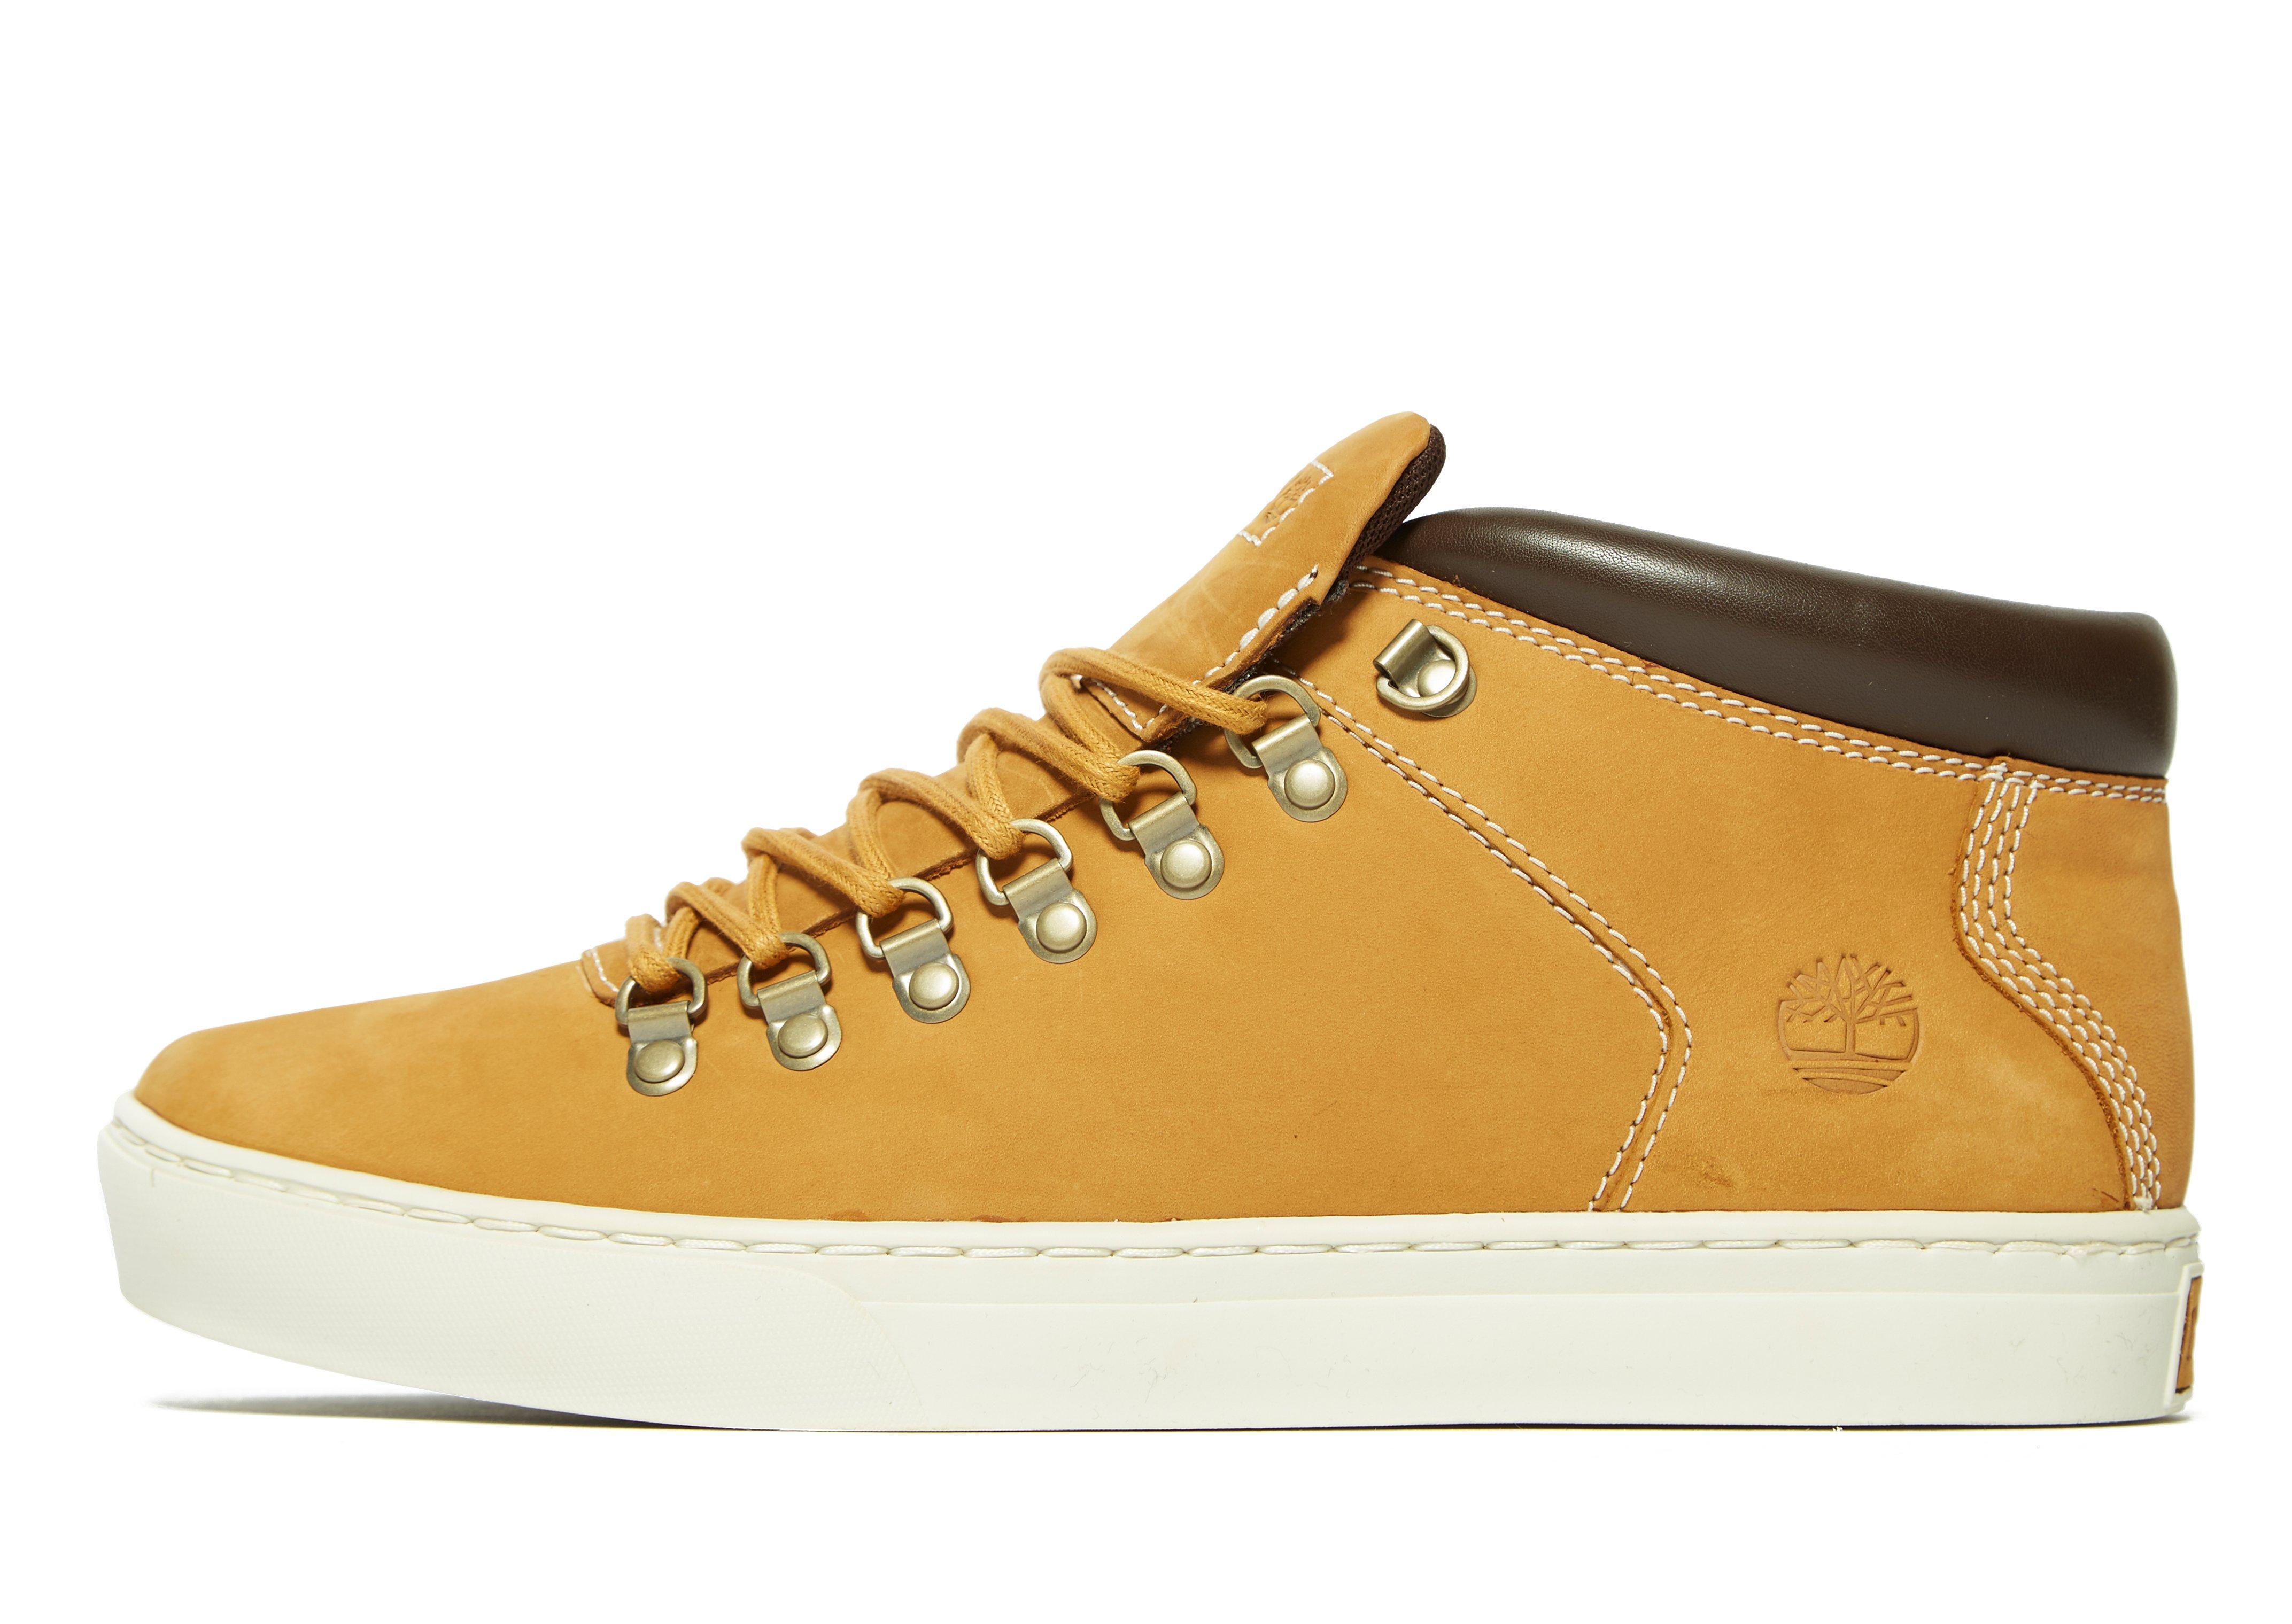 Timberland Leather Alpine Chukka in Brown for Men - Lyst